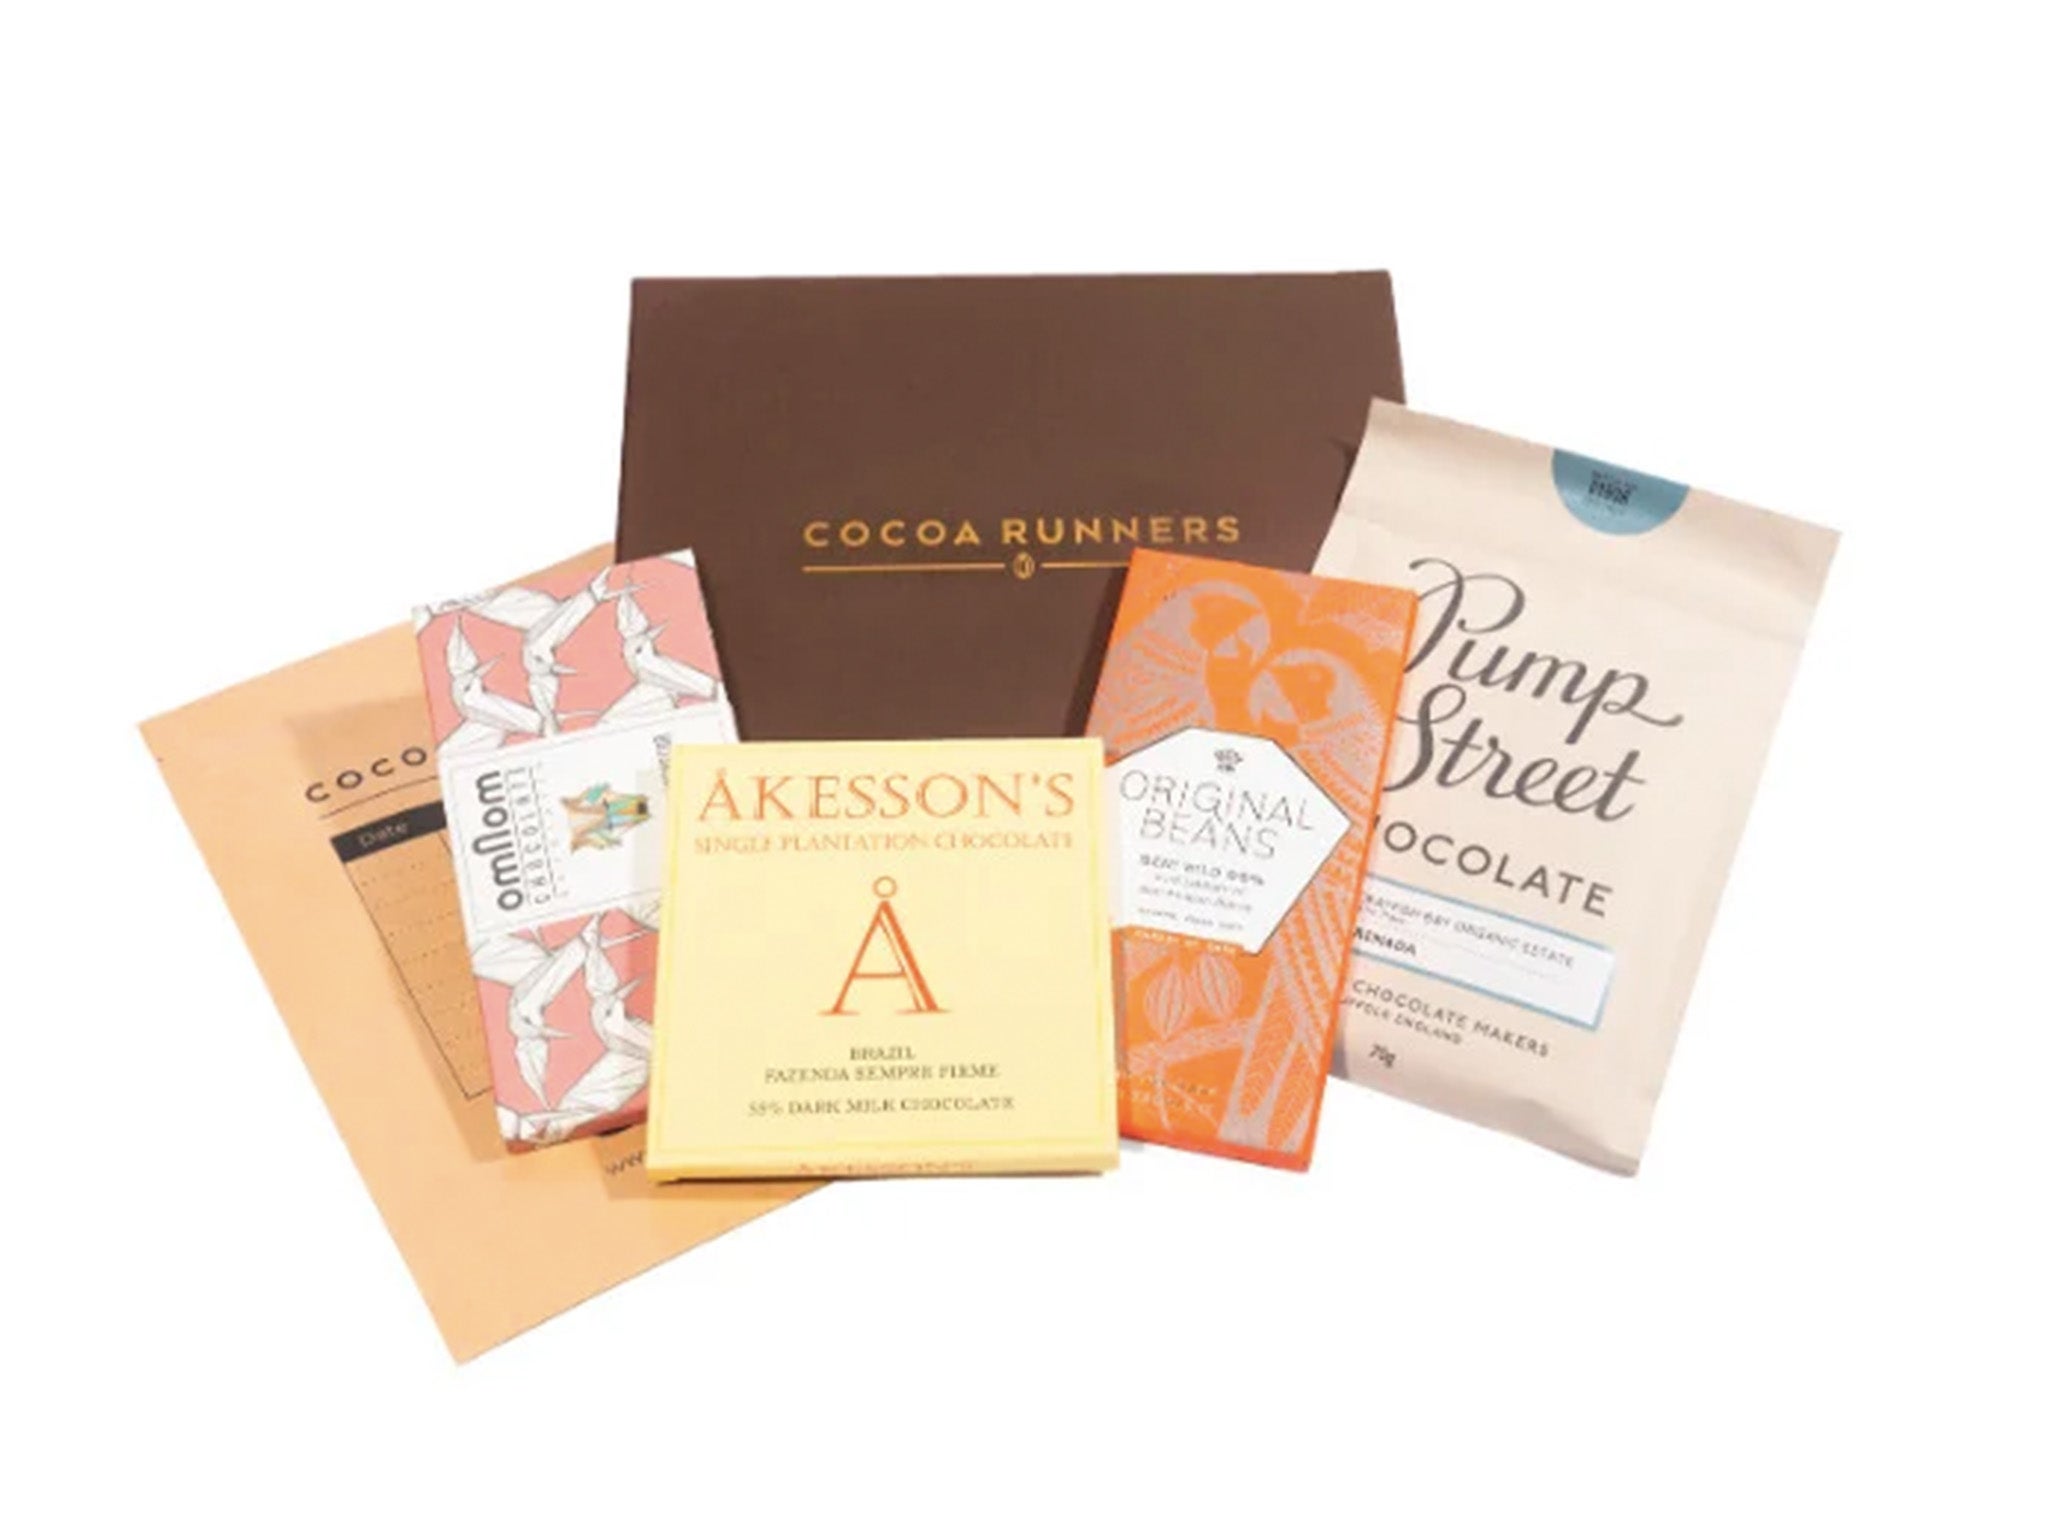 Cocoa Runners monthly subscription